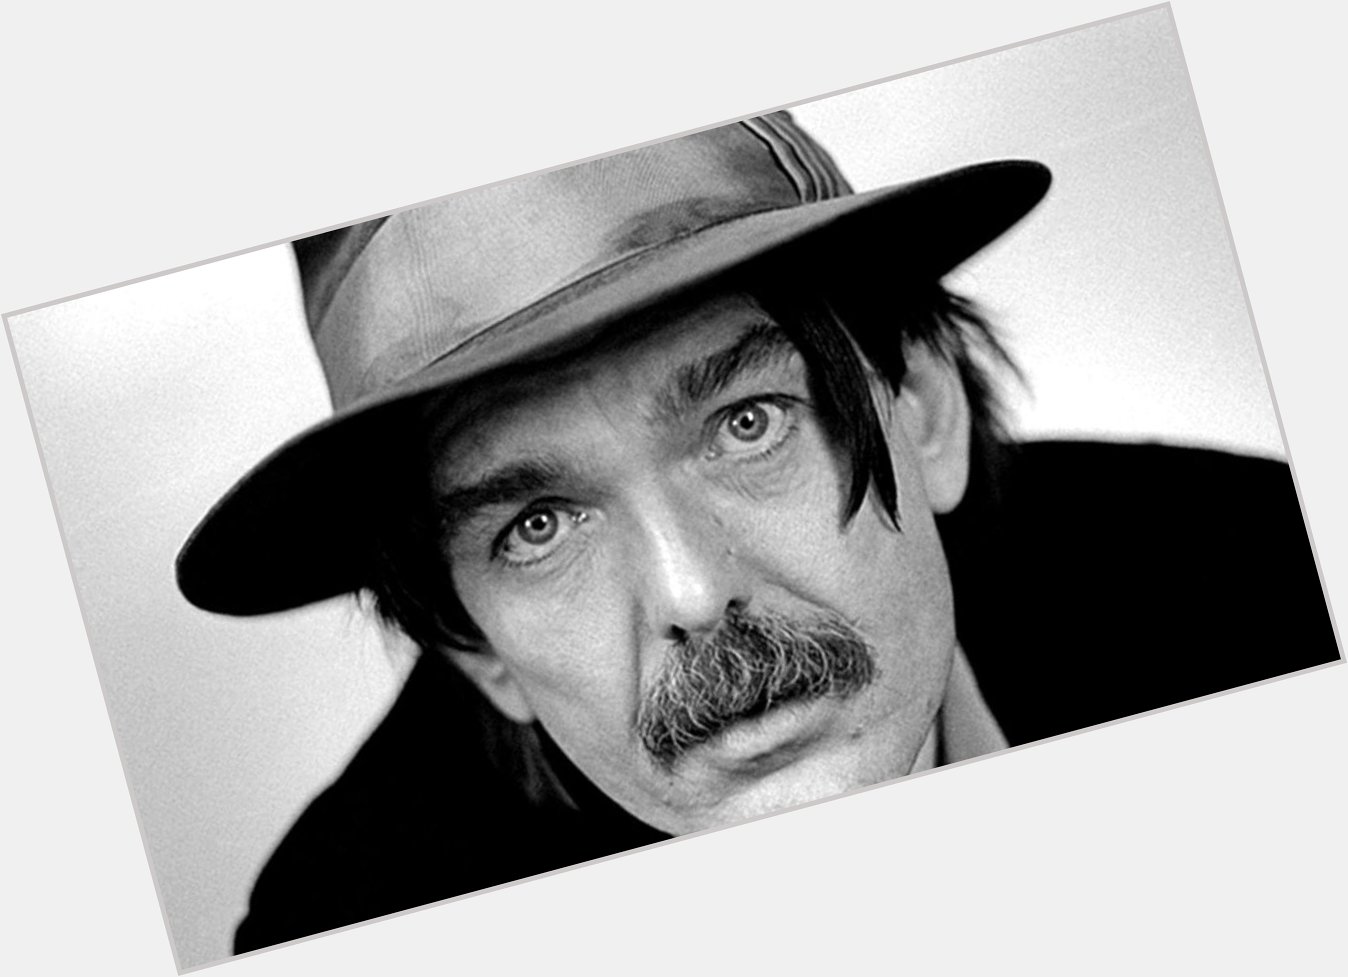 Happy birthday to the late Captain Beefheart, who was born on this day in 1941 